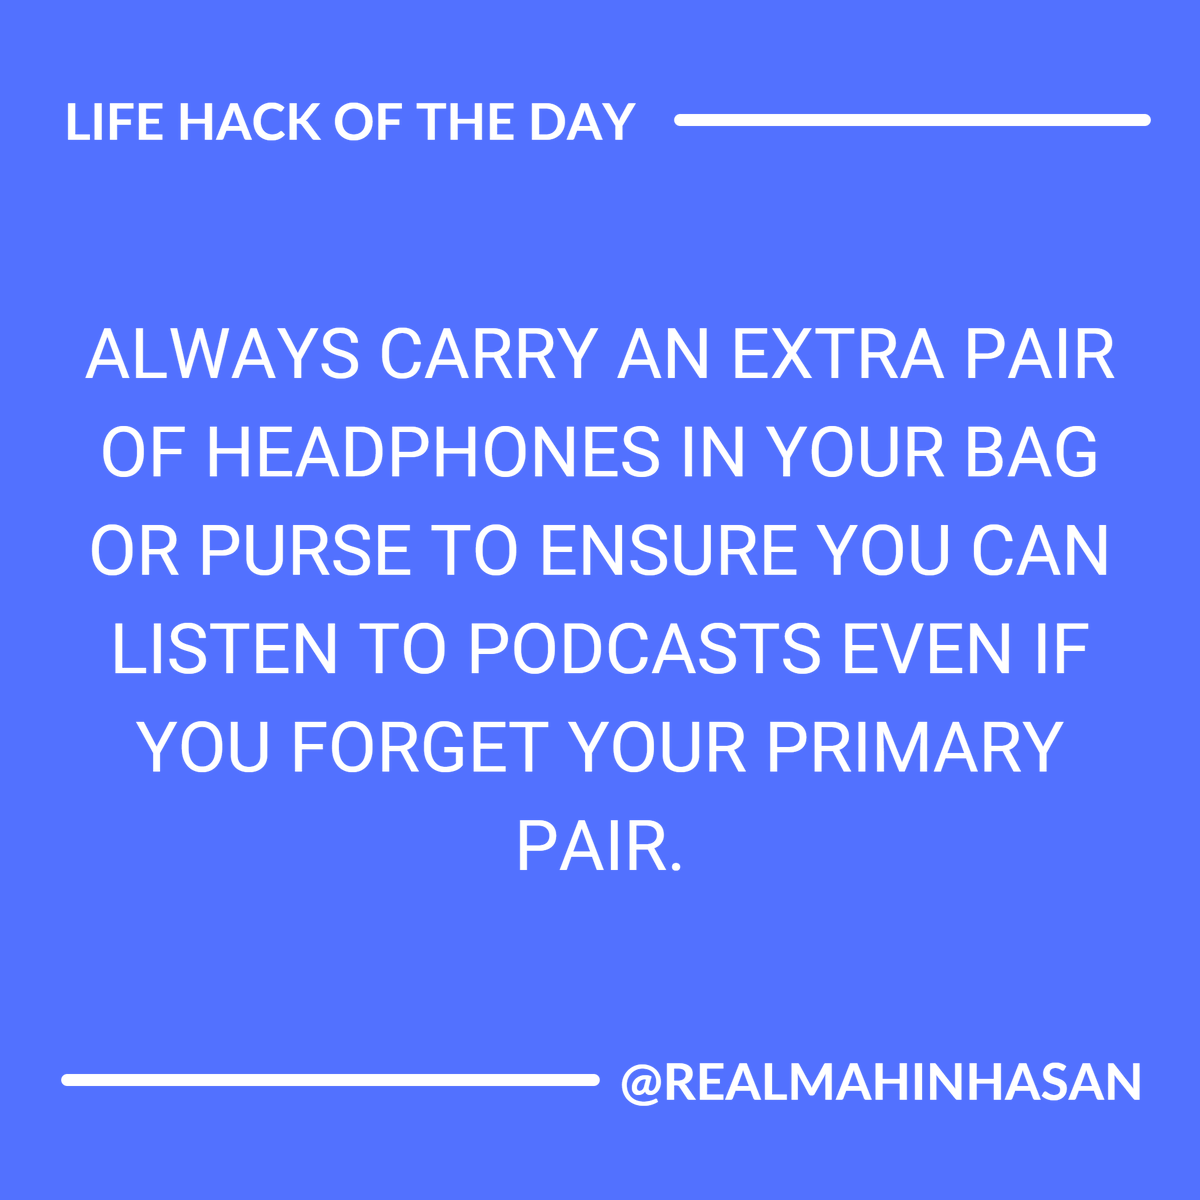 Keep a spare set of headphones in your bag to avoid being without podcasts. #TechHack #BackupHeadphones